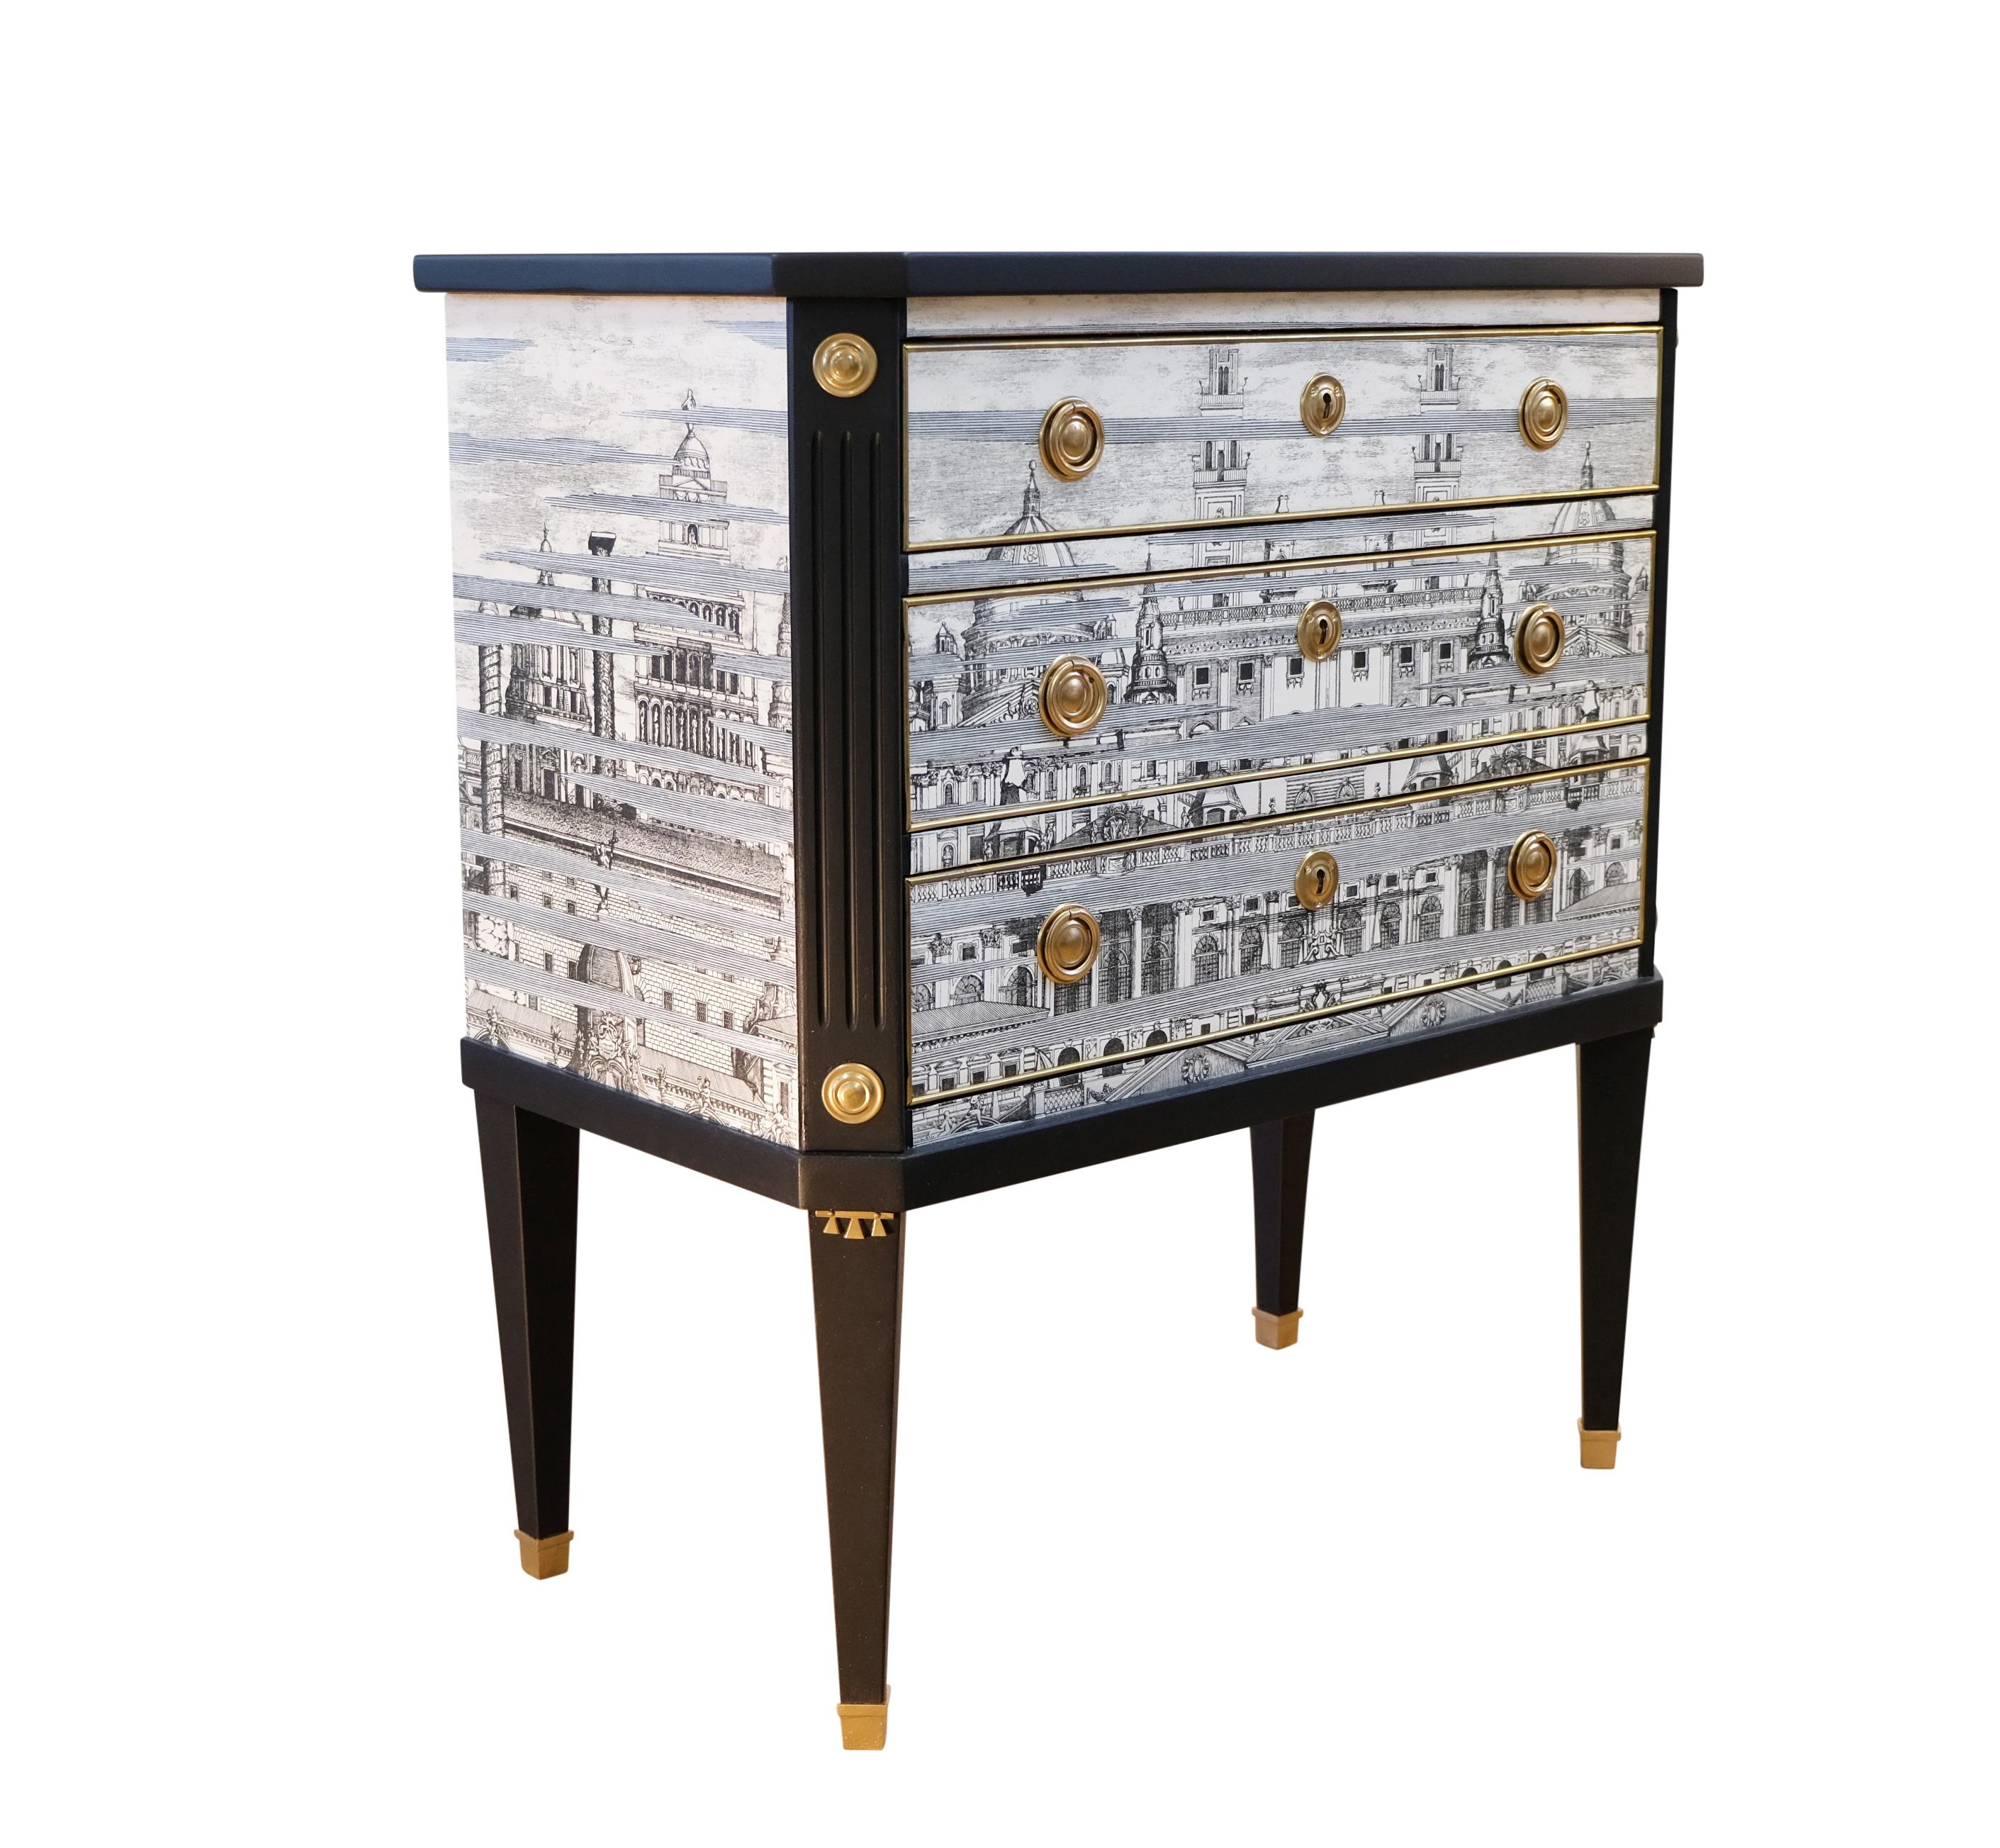 Gustavian chest with Fornasetti Ancient Rome Design and Natural Marble Top. Original cast brass fittings to the drawers and legs. 

Width: 70cm / 27.6